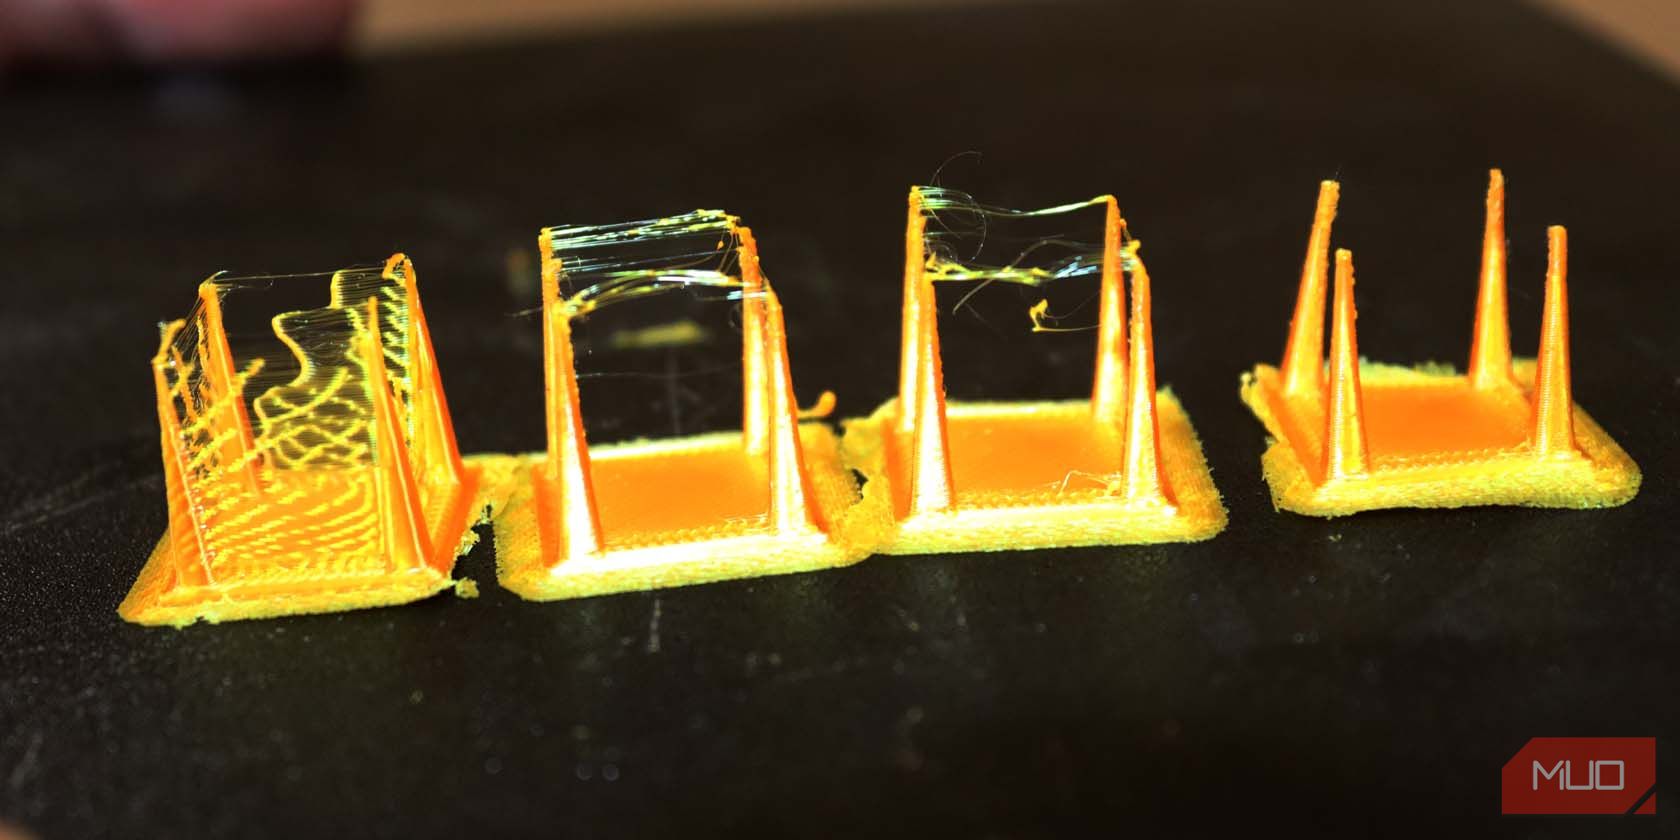 Several 3d prints covered with strings and one without